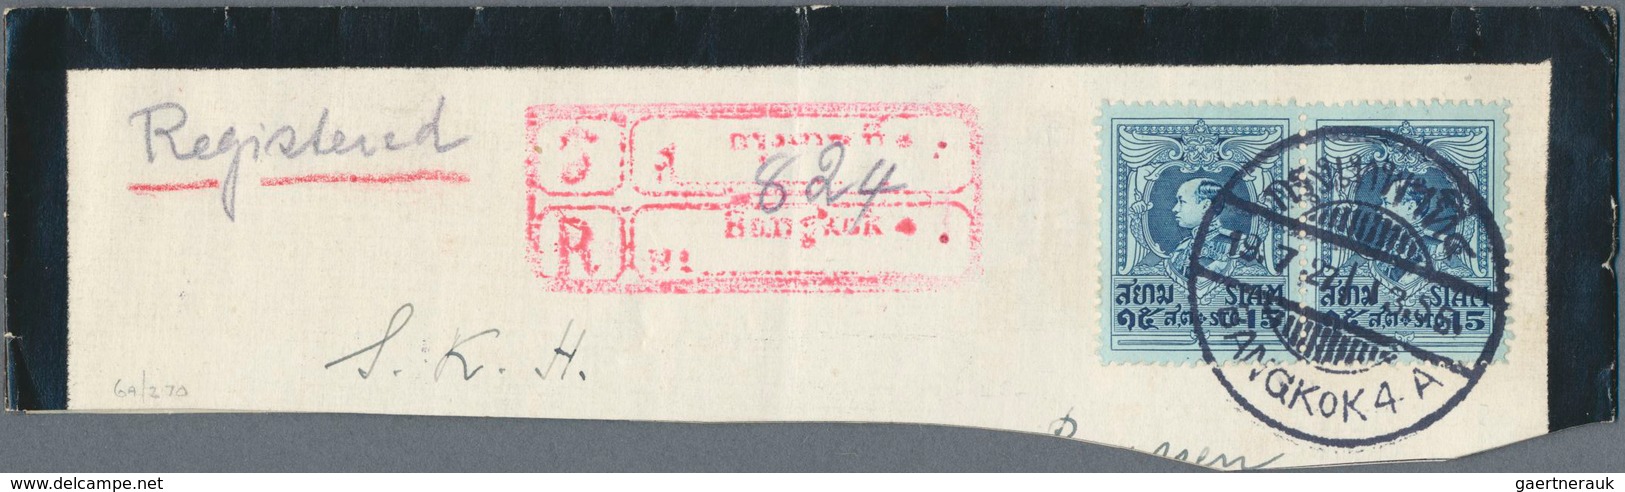 Thailand: 1925-27 Two 'On Post & Telegraph Service' Official Mourning Envelopes From Bangkok To Bern - Thaïlande